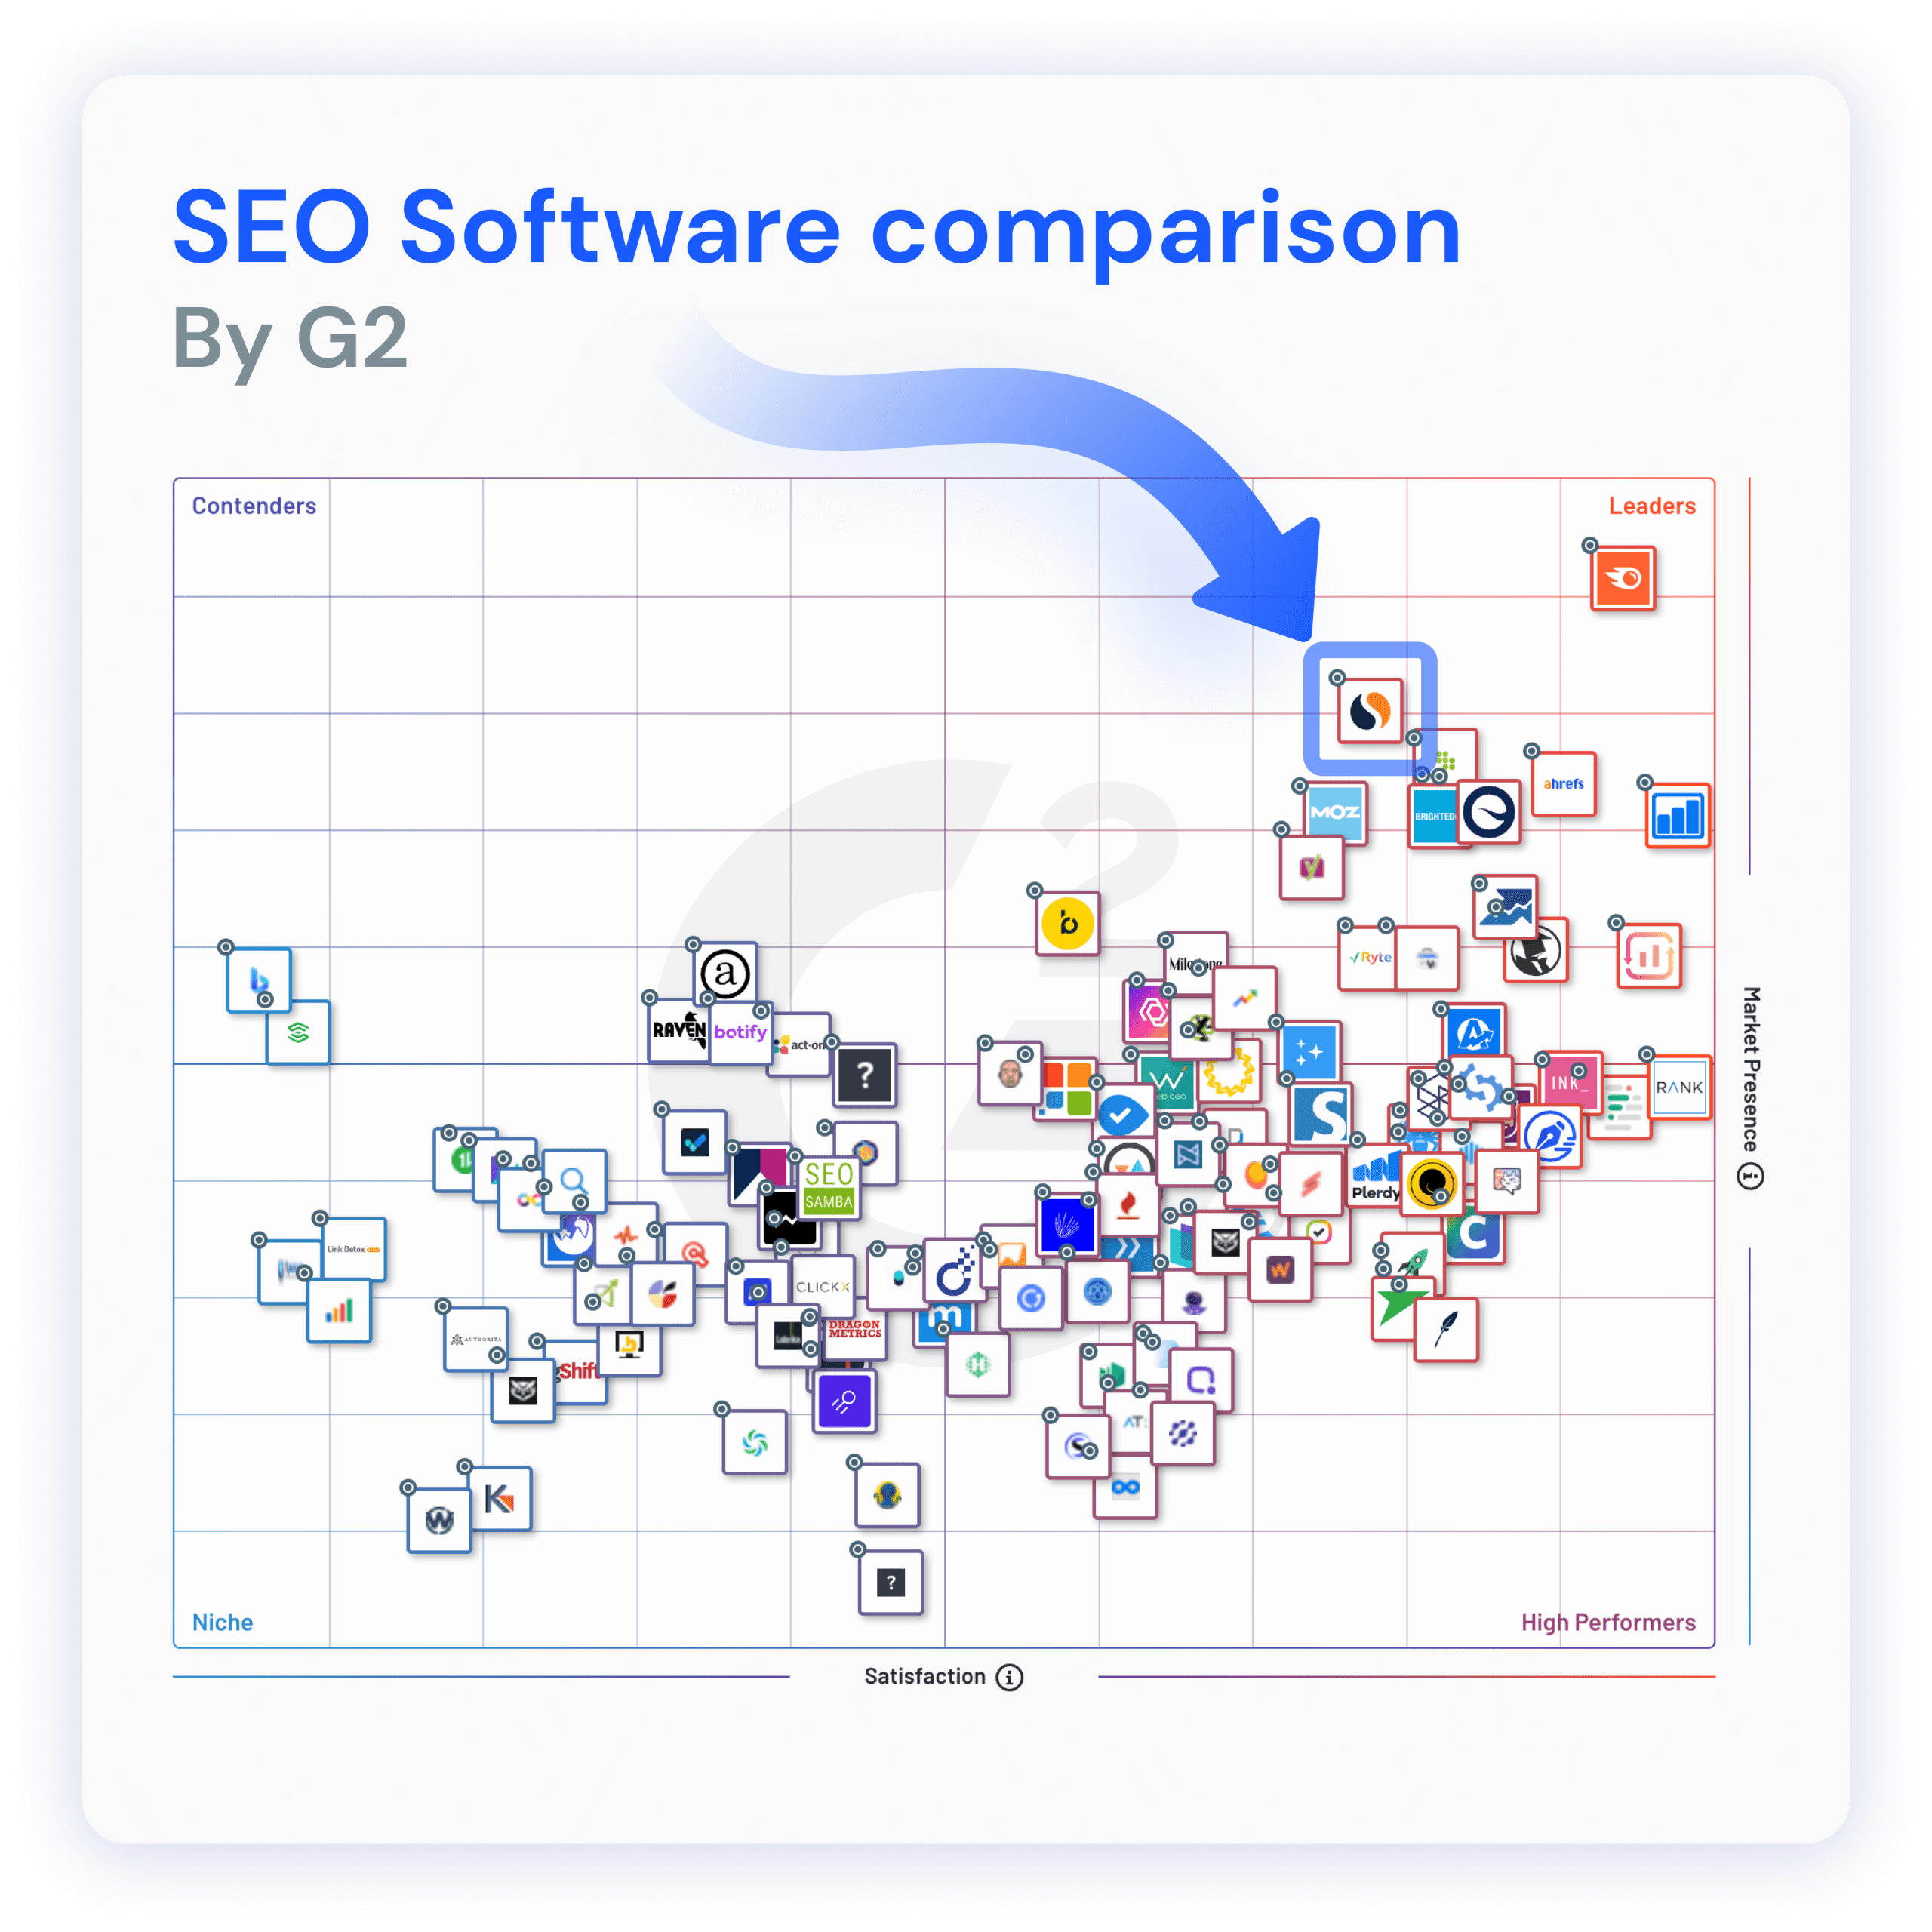 SEO software comparison by G2